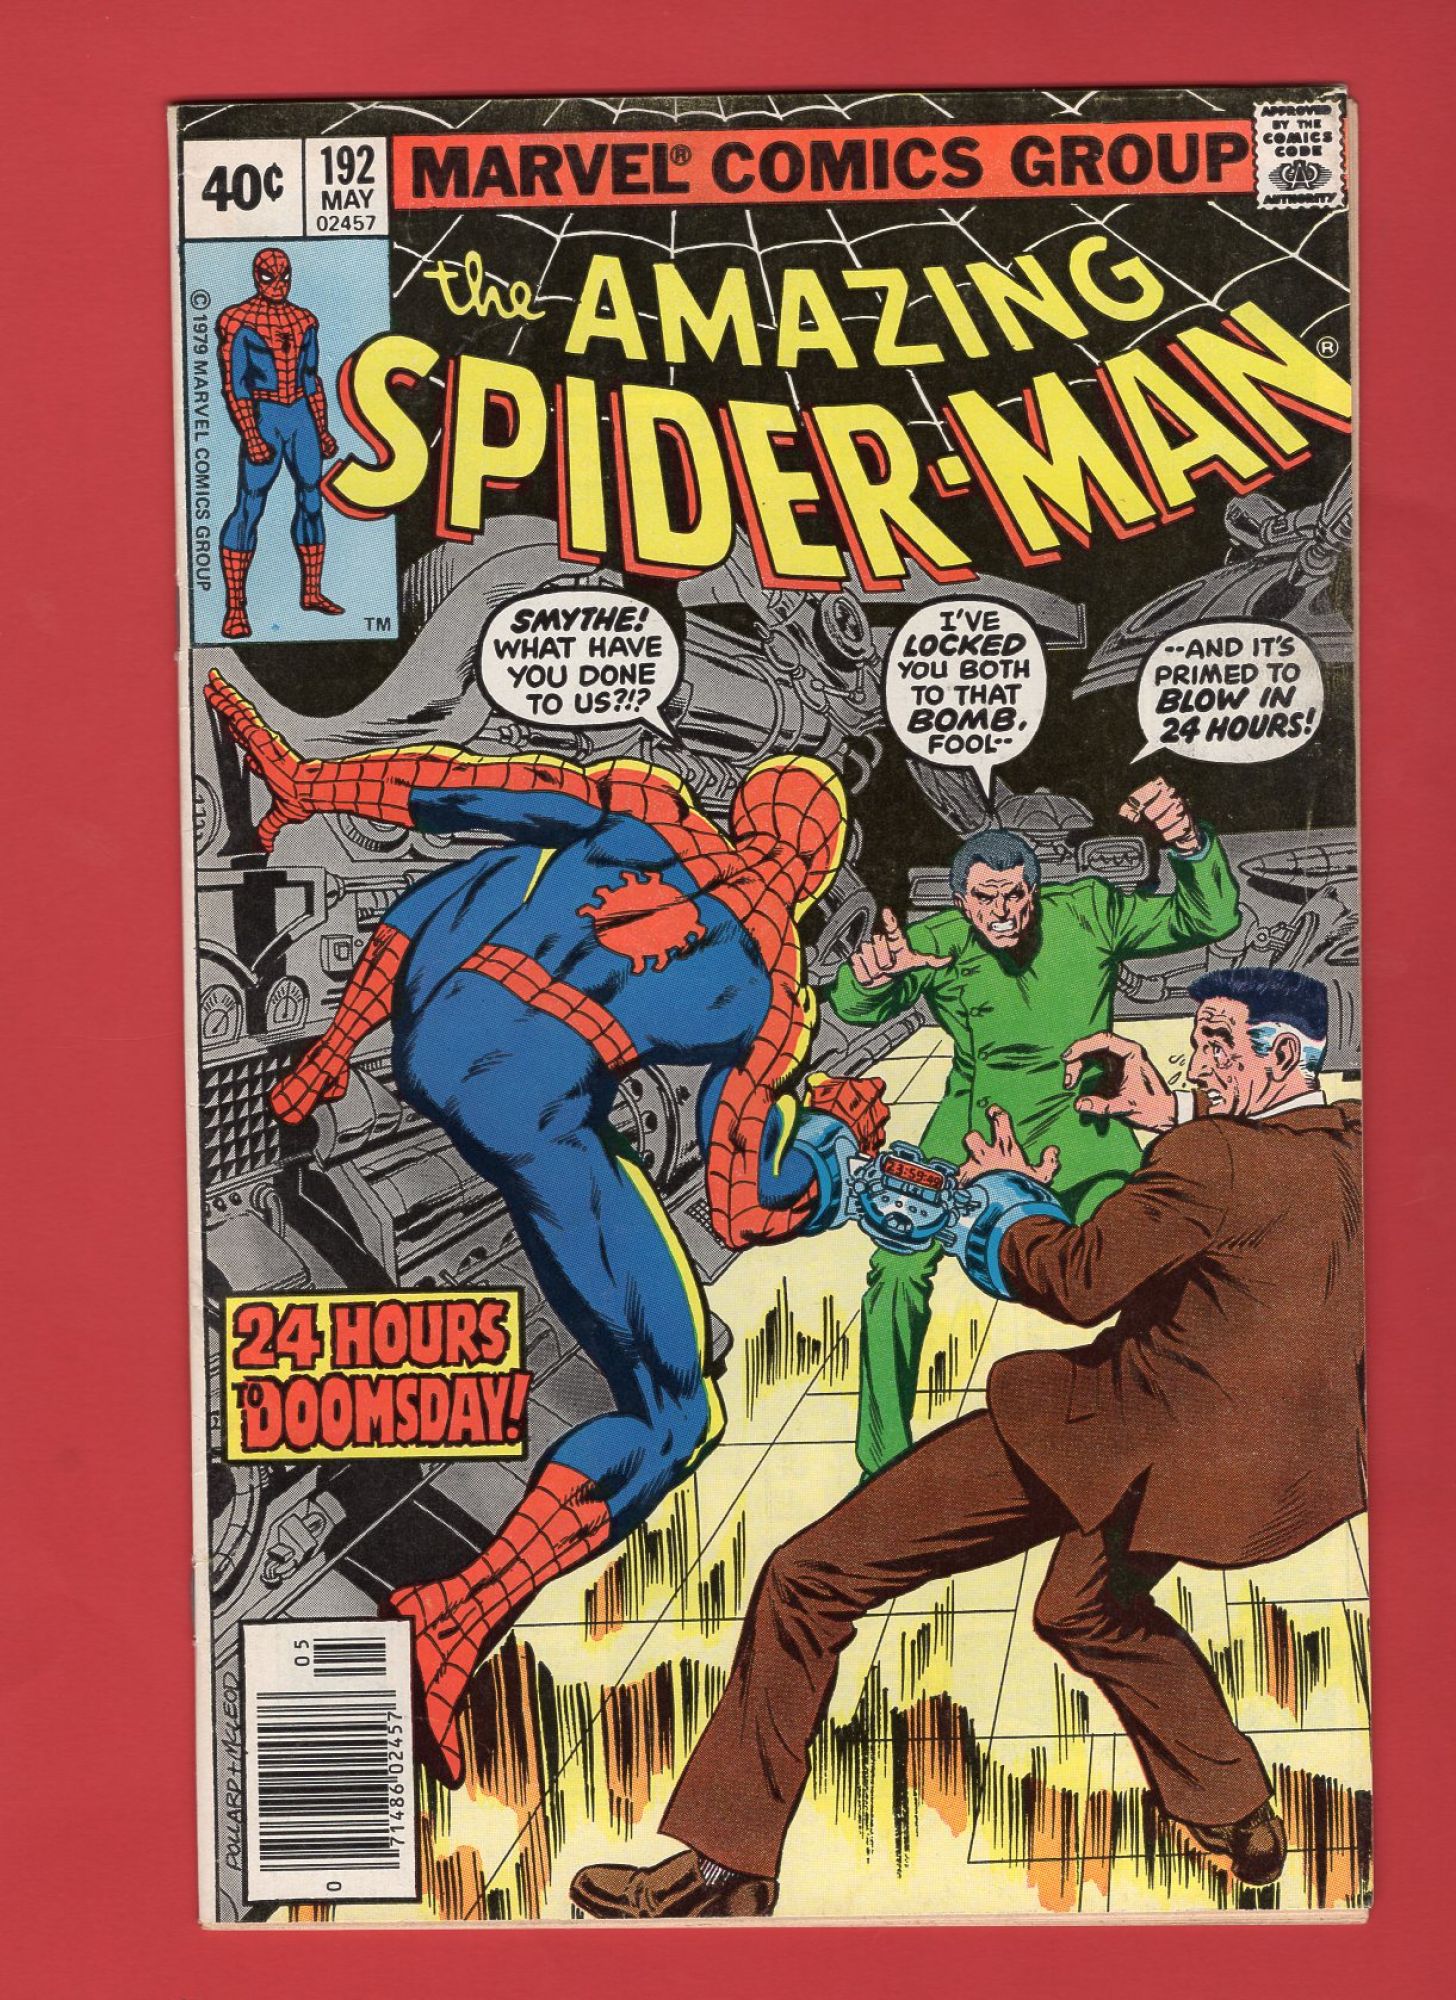 Amazing Spider-Man #192, May 1979, 6.0 FN